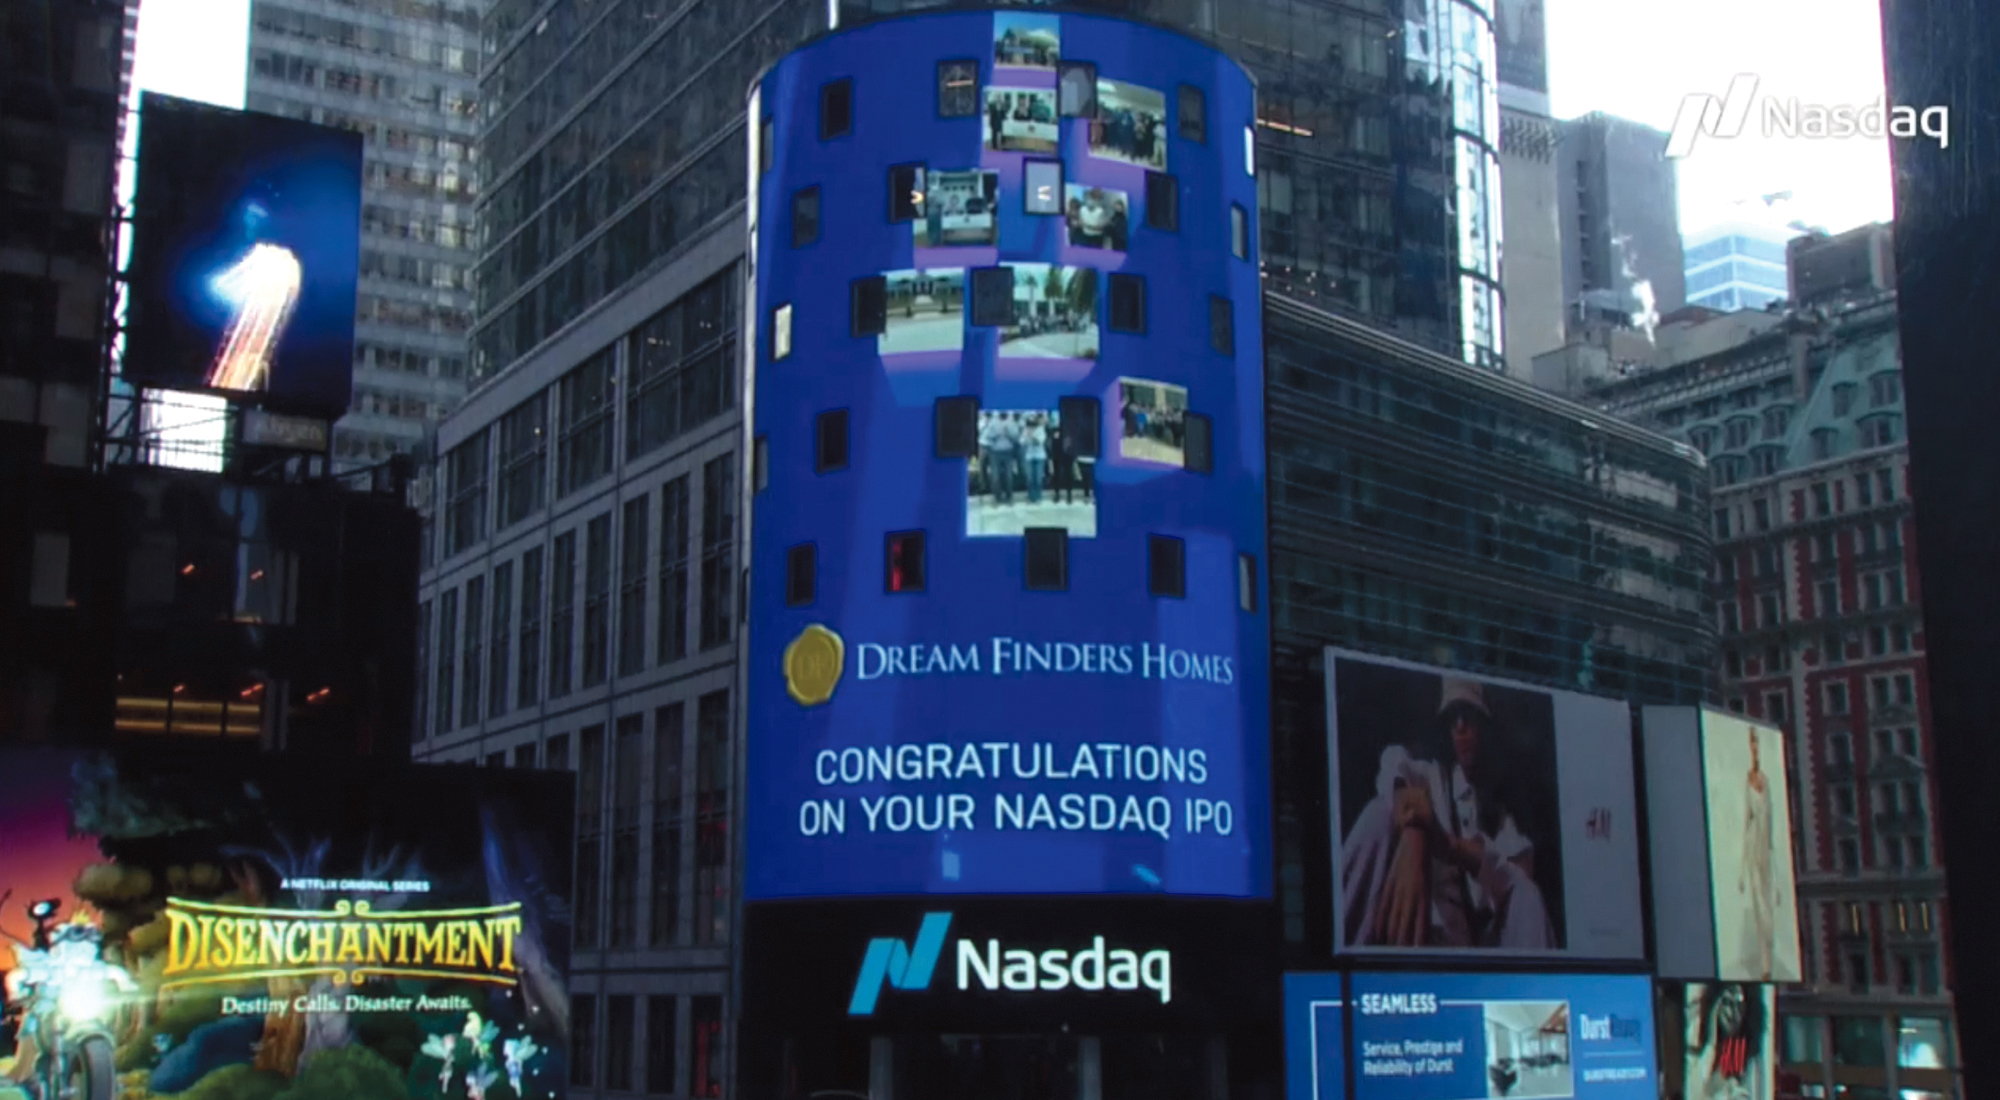 Dream Finders Homes began trading Jan. 21 on the on the Nasdaq Global Select Market and was featured on this digital sign in Times Square in New York. The stock trades under the ticker symbol “DFH.”